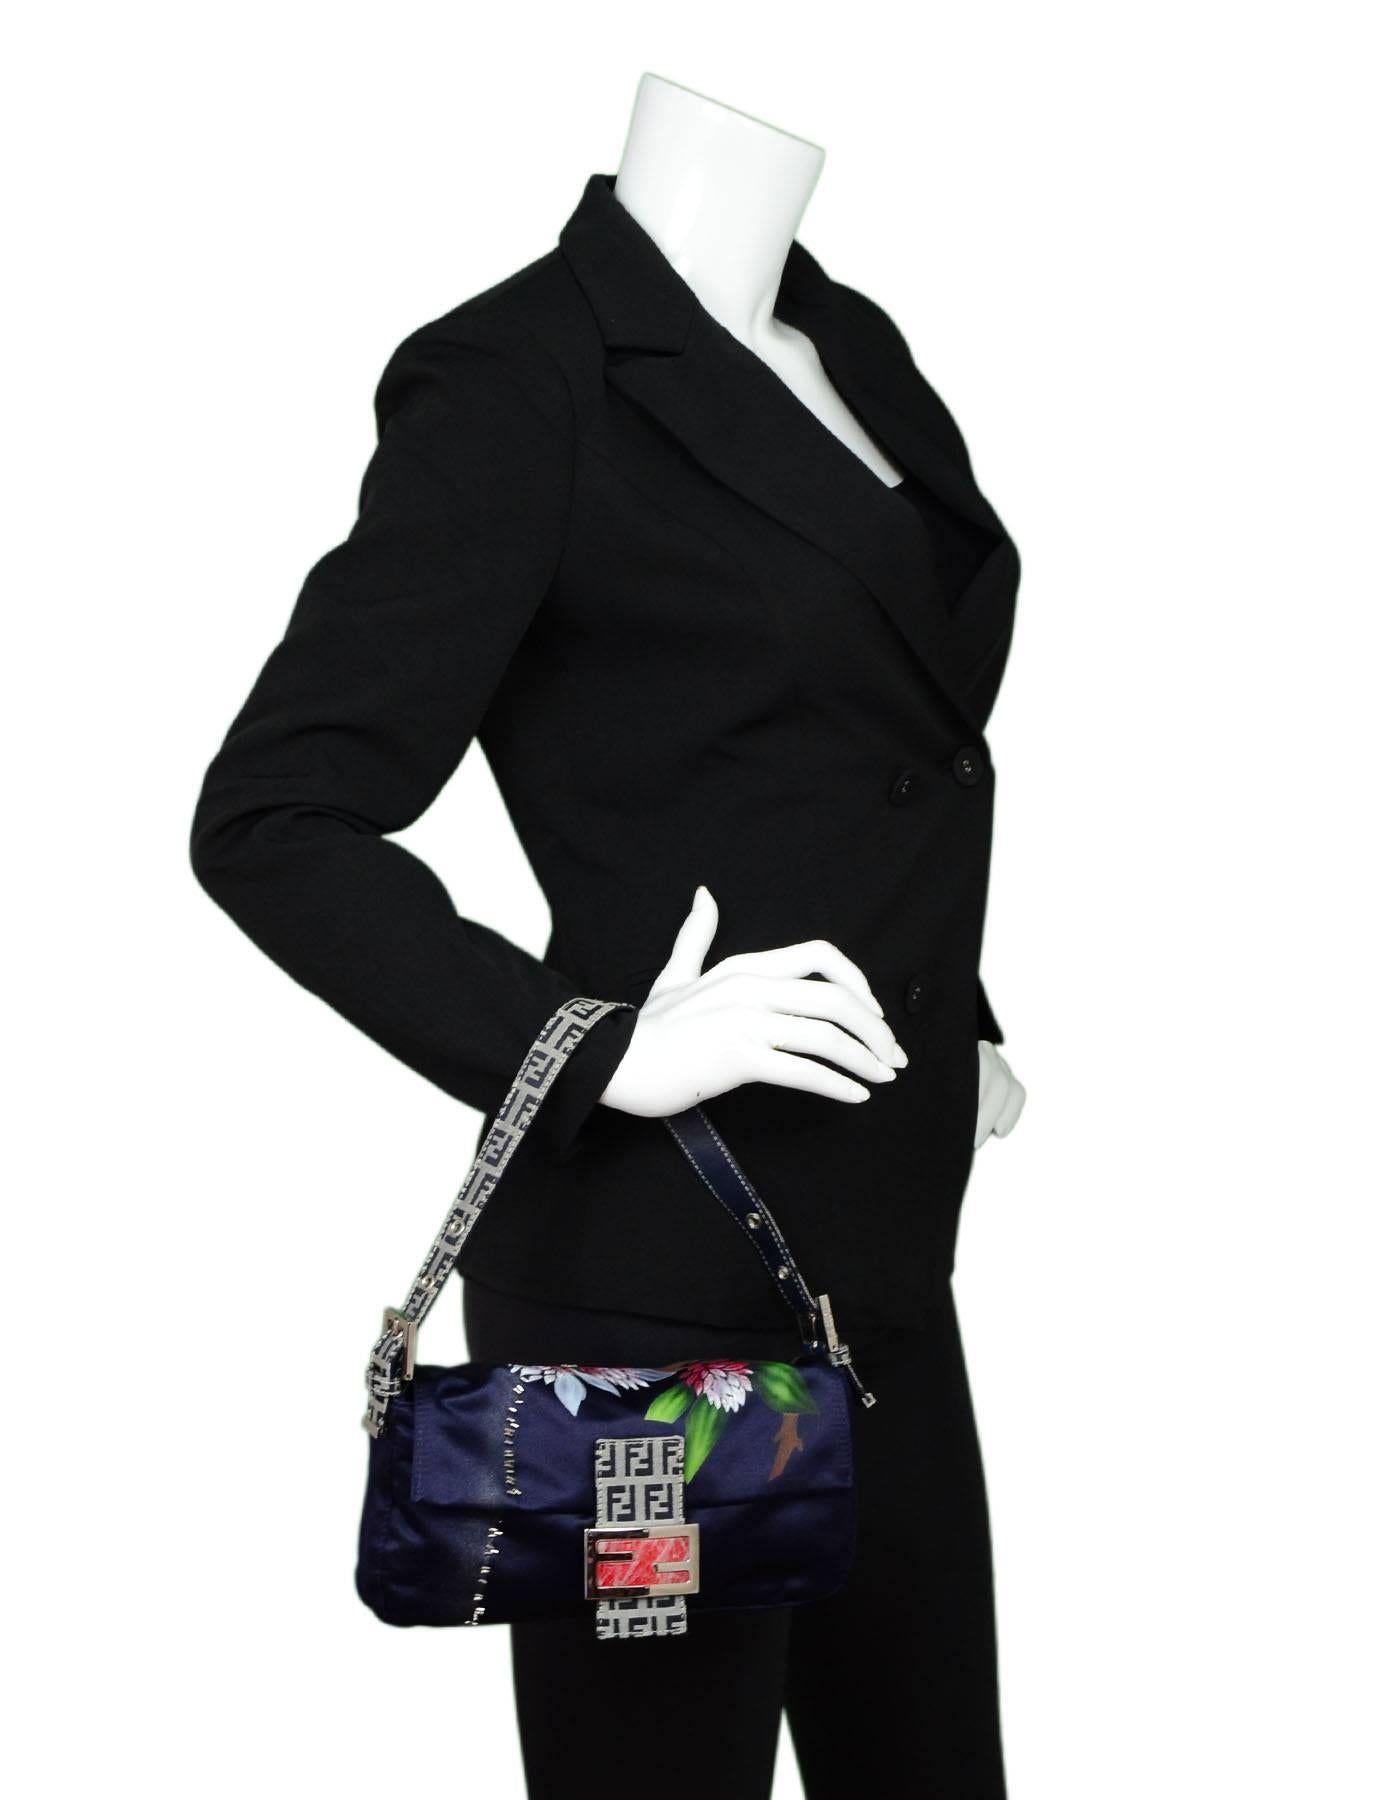 Fendi Navy Satin Floral Baguette
Features zucca strap and beading

Made In: Italy
Color: Navy, multi
Hardware: Silvertone
Materials: Satin, metal, beads
Lining: Navy textile
Closure/Opening: Flap top with magnetic snap closure
Exterior Pockets: